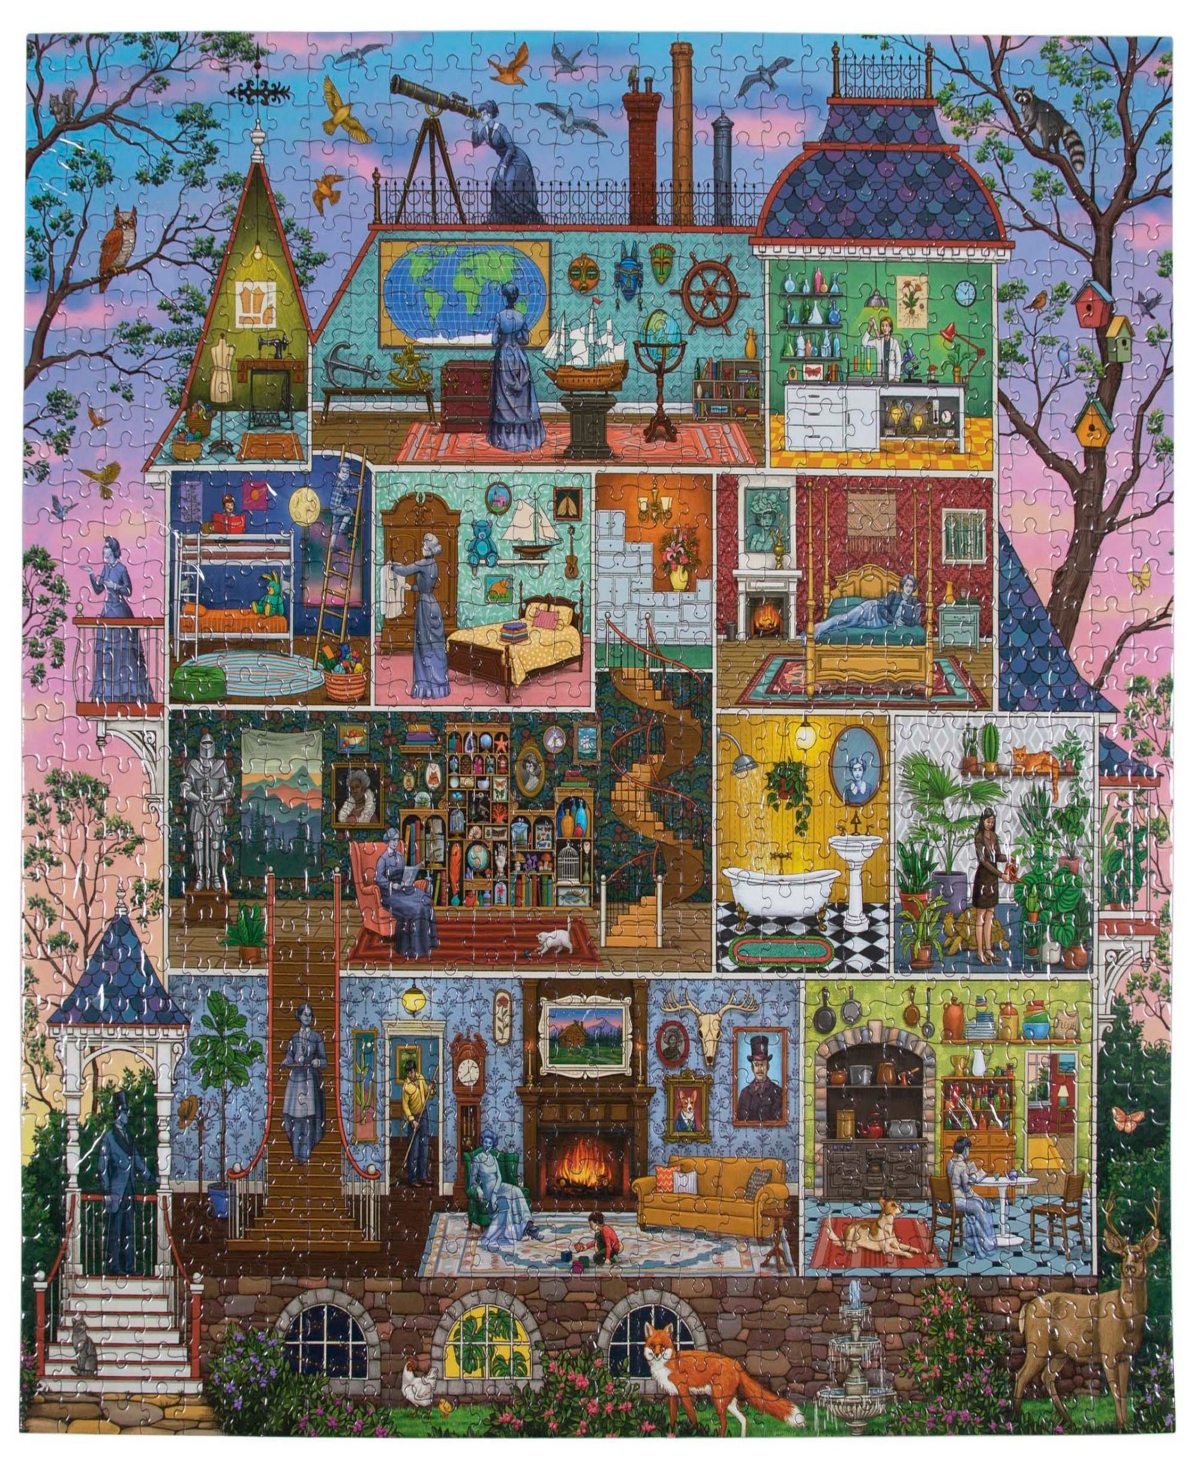 Shop Eeboo Piece And Love The Alchemist's Home 1000 Piece Square Adult Jigsaw Puzzle Set, Ages 14 Years And Up In Multi